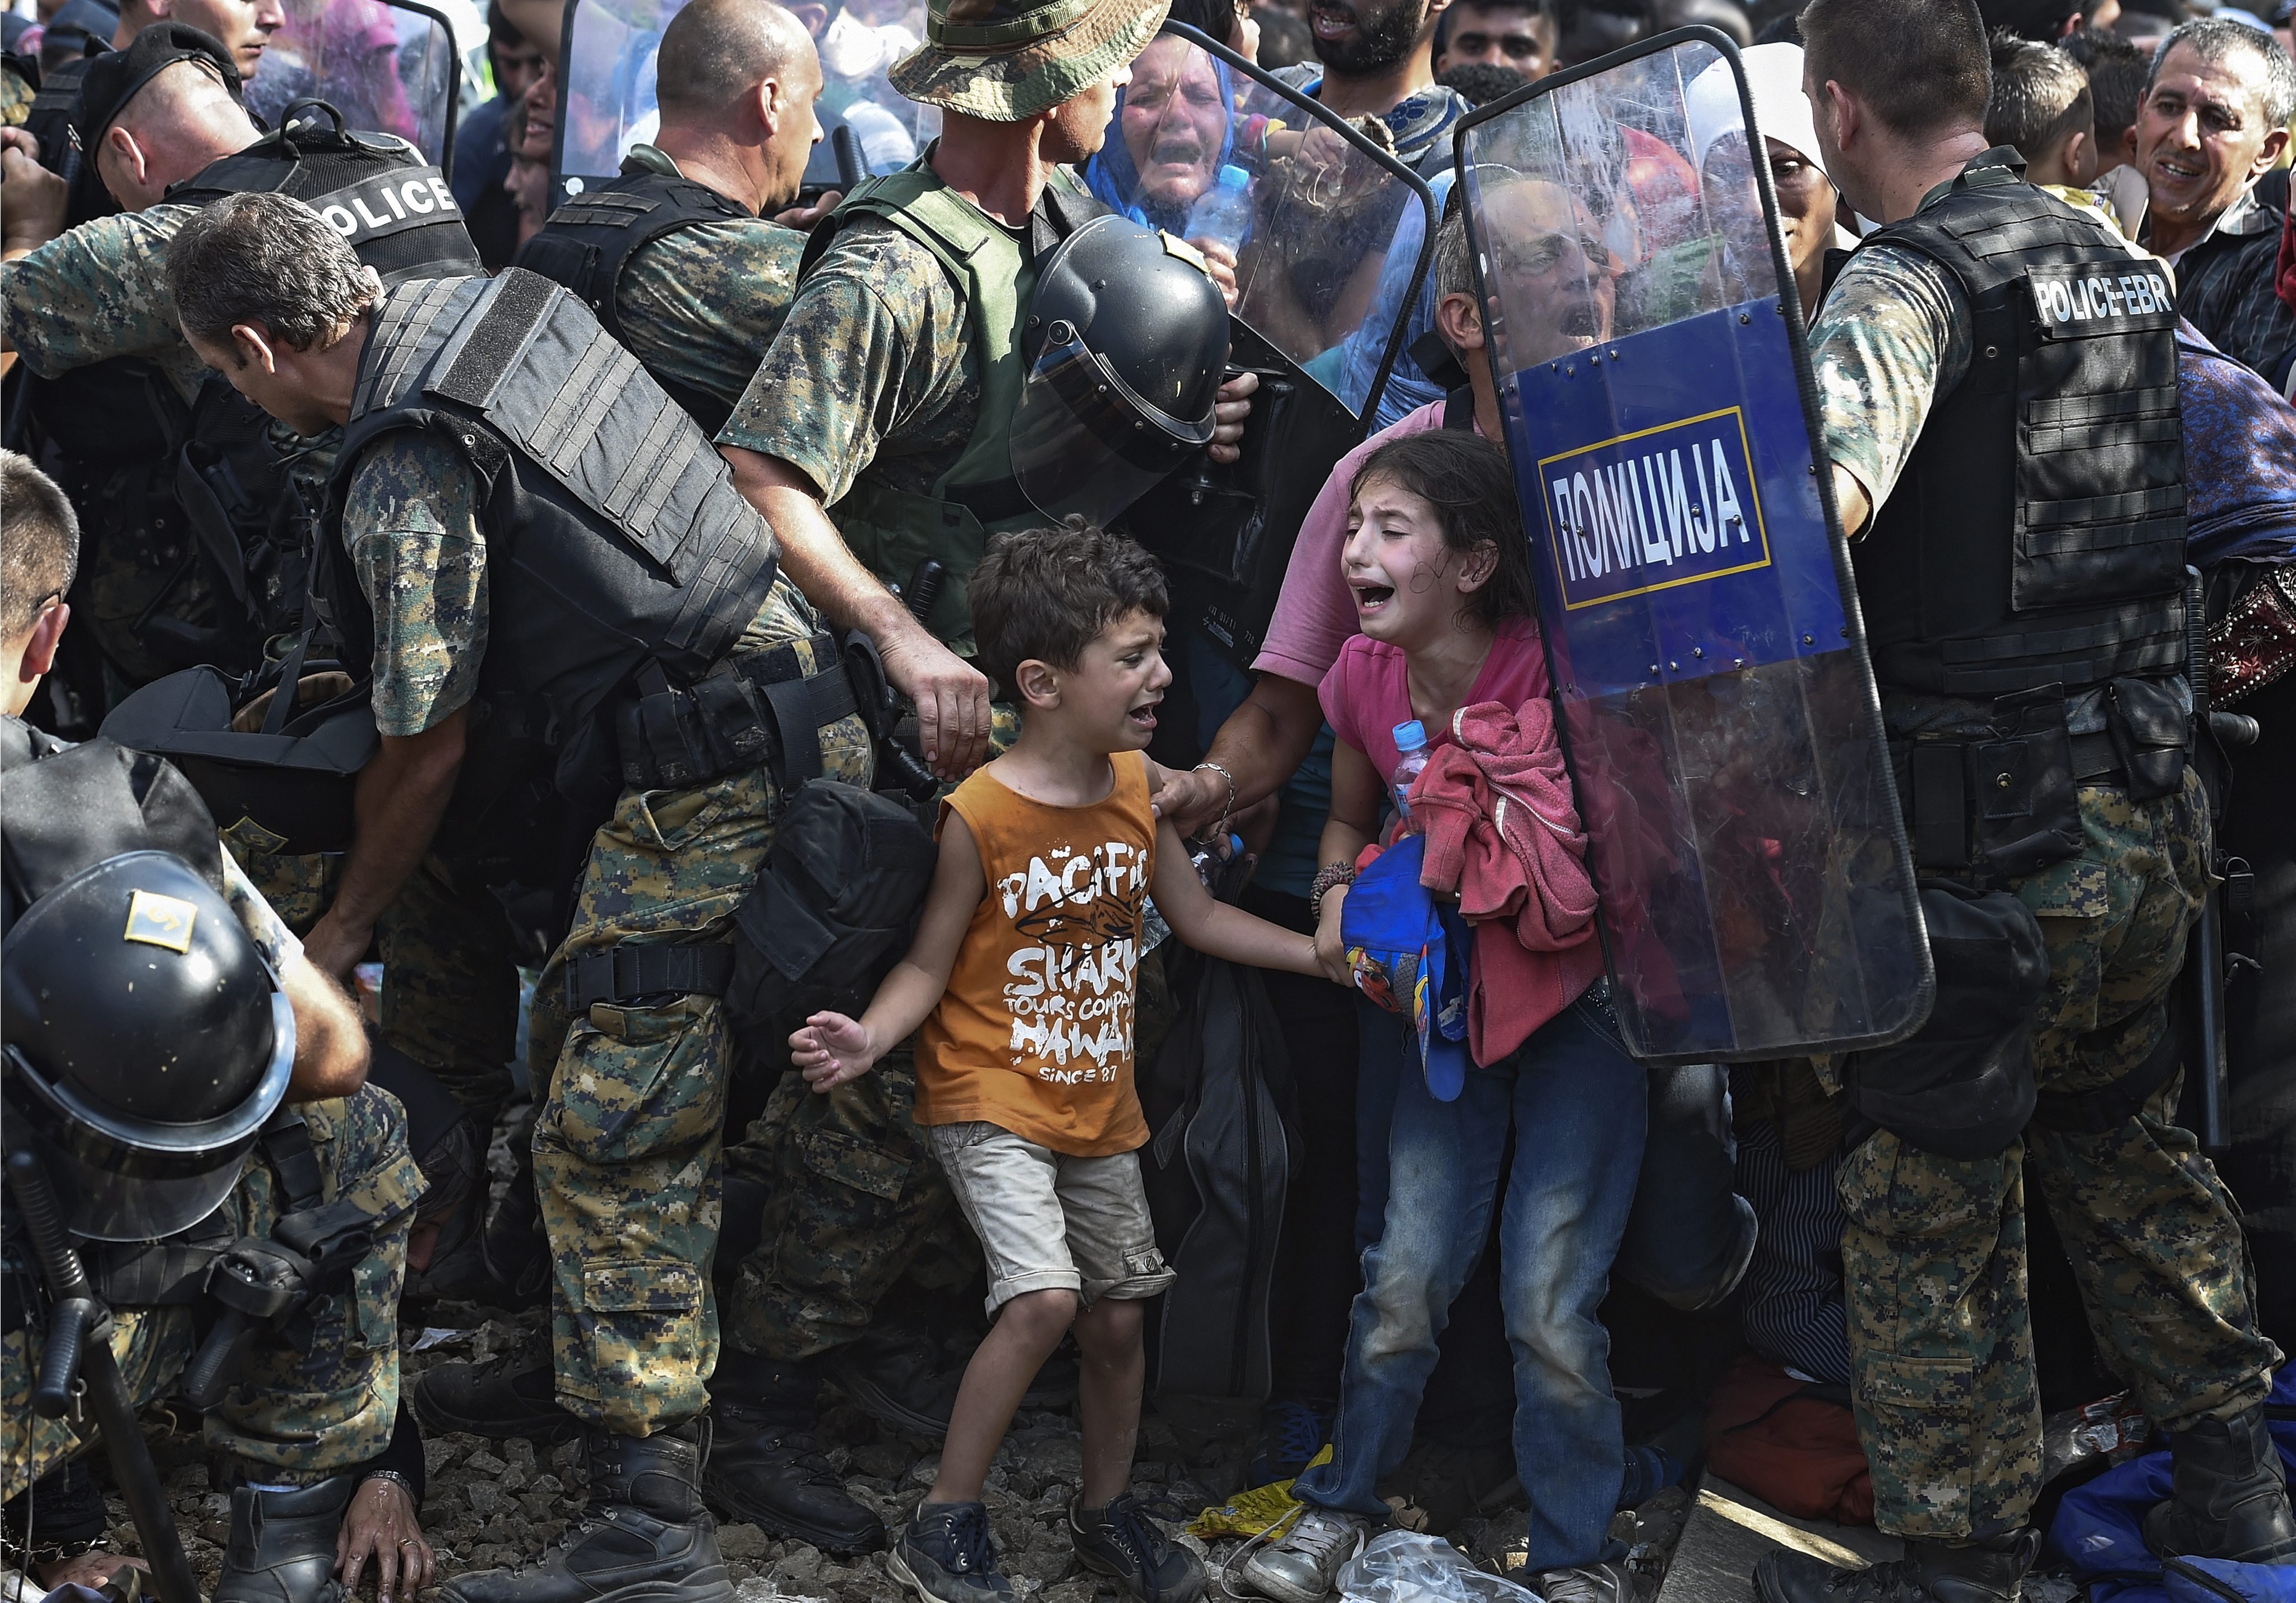 Children cry as migrants waiting on the Greek side of the border break through a cordon of Macedonian special police forces to cross into Macedonia, near the southern city of Gevgelija, The Former Yugoslav Republic of Macedonia on Aug. 21, 2015. Macedonian police clashed with thousands of migrants attempting to break into the country after being stranded in no-man's land overnight, marking an escalation of the European refugee crisis for the Balkan country. (Georgi Licovski—EPA)